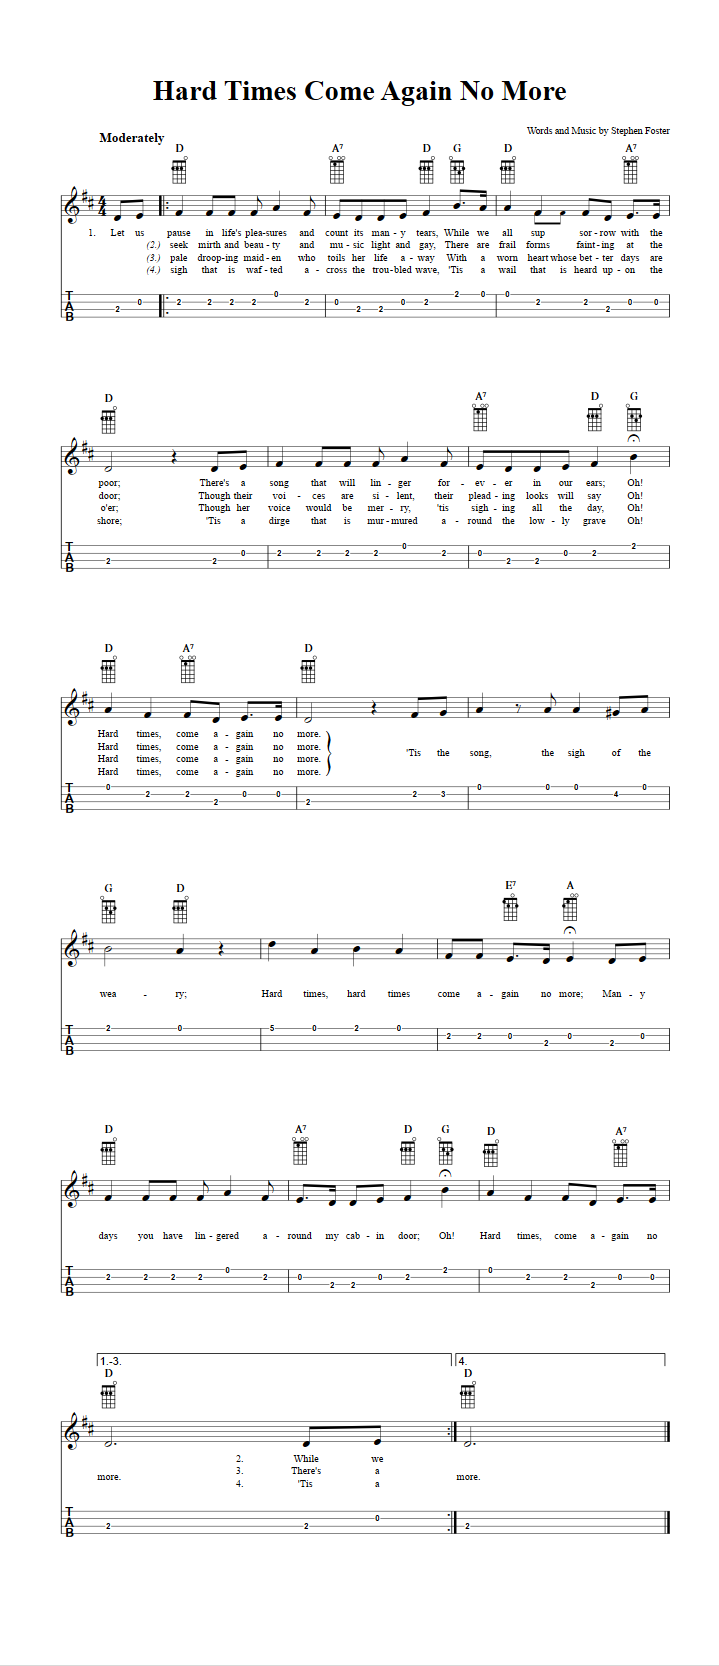 Hard Times Come Again No More Chords Sheet Music And Tab For Ukulele With Lyrics